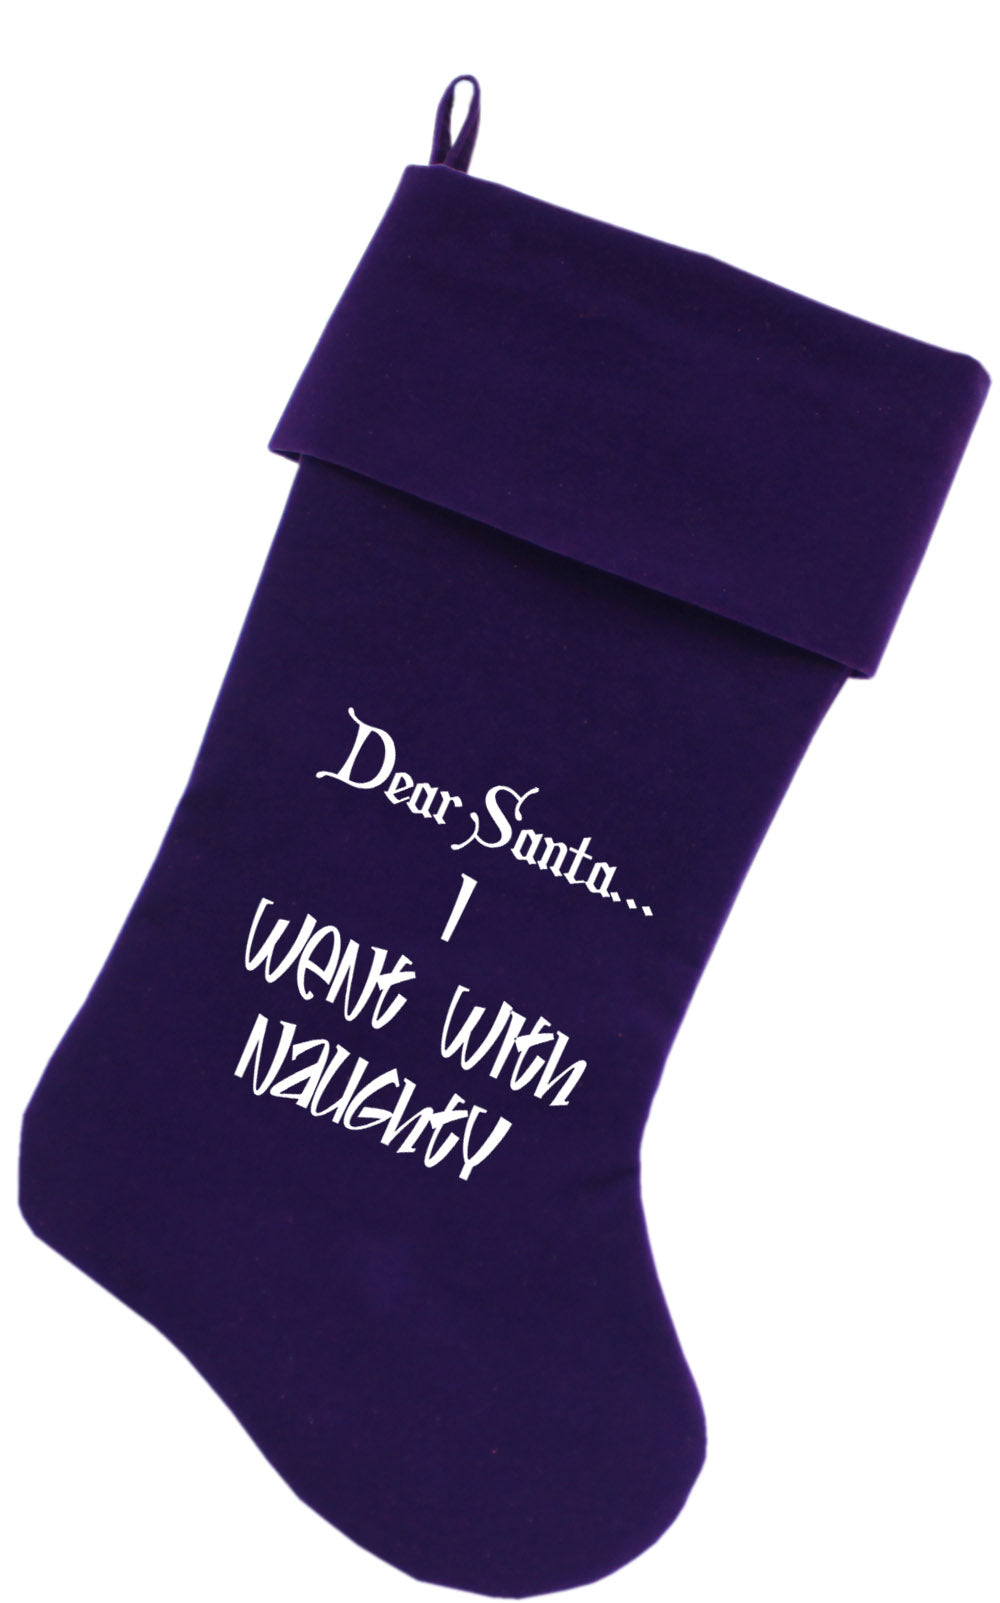 Went With Naughty Screen Print 18 Inch Velvet Christmas Stocking Purple GreatEagleInc